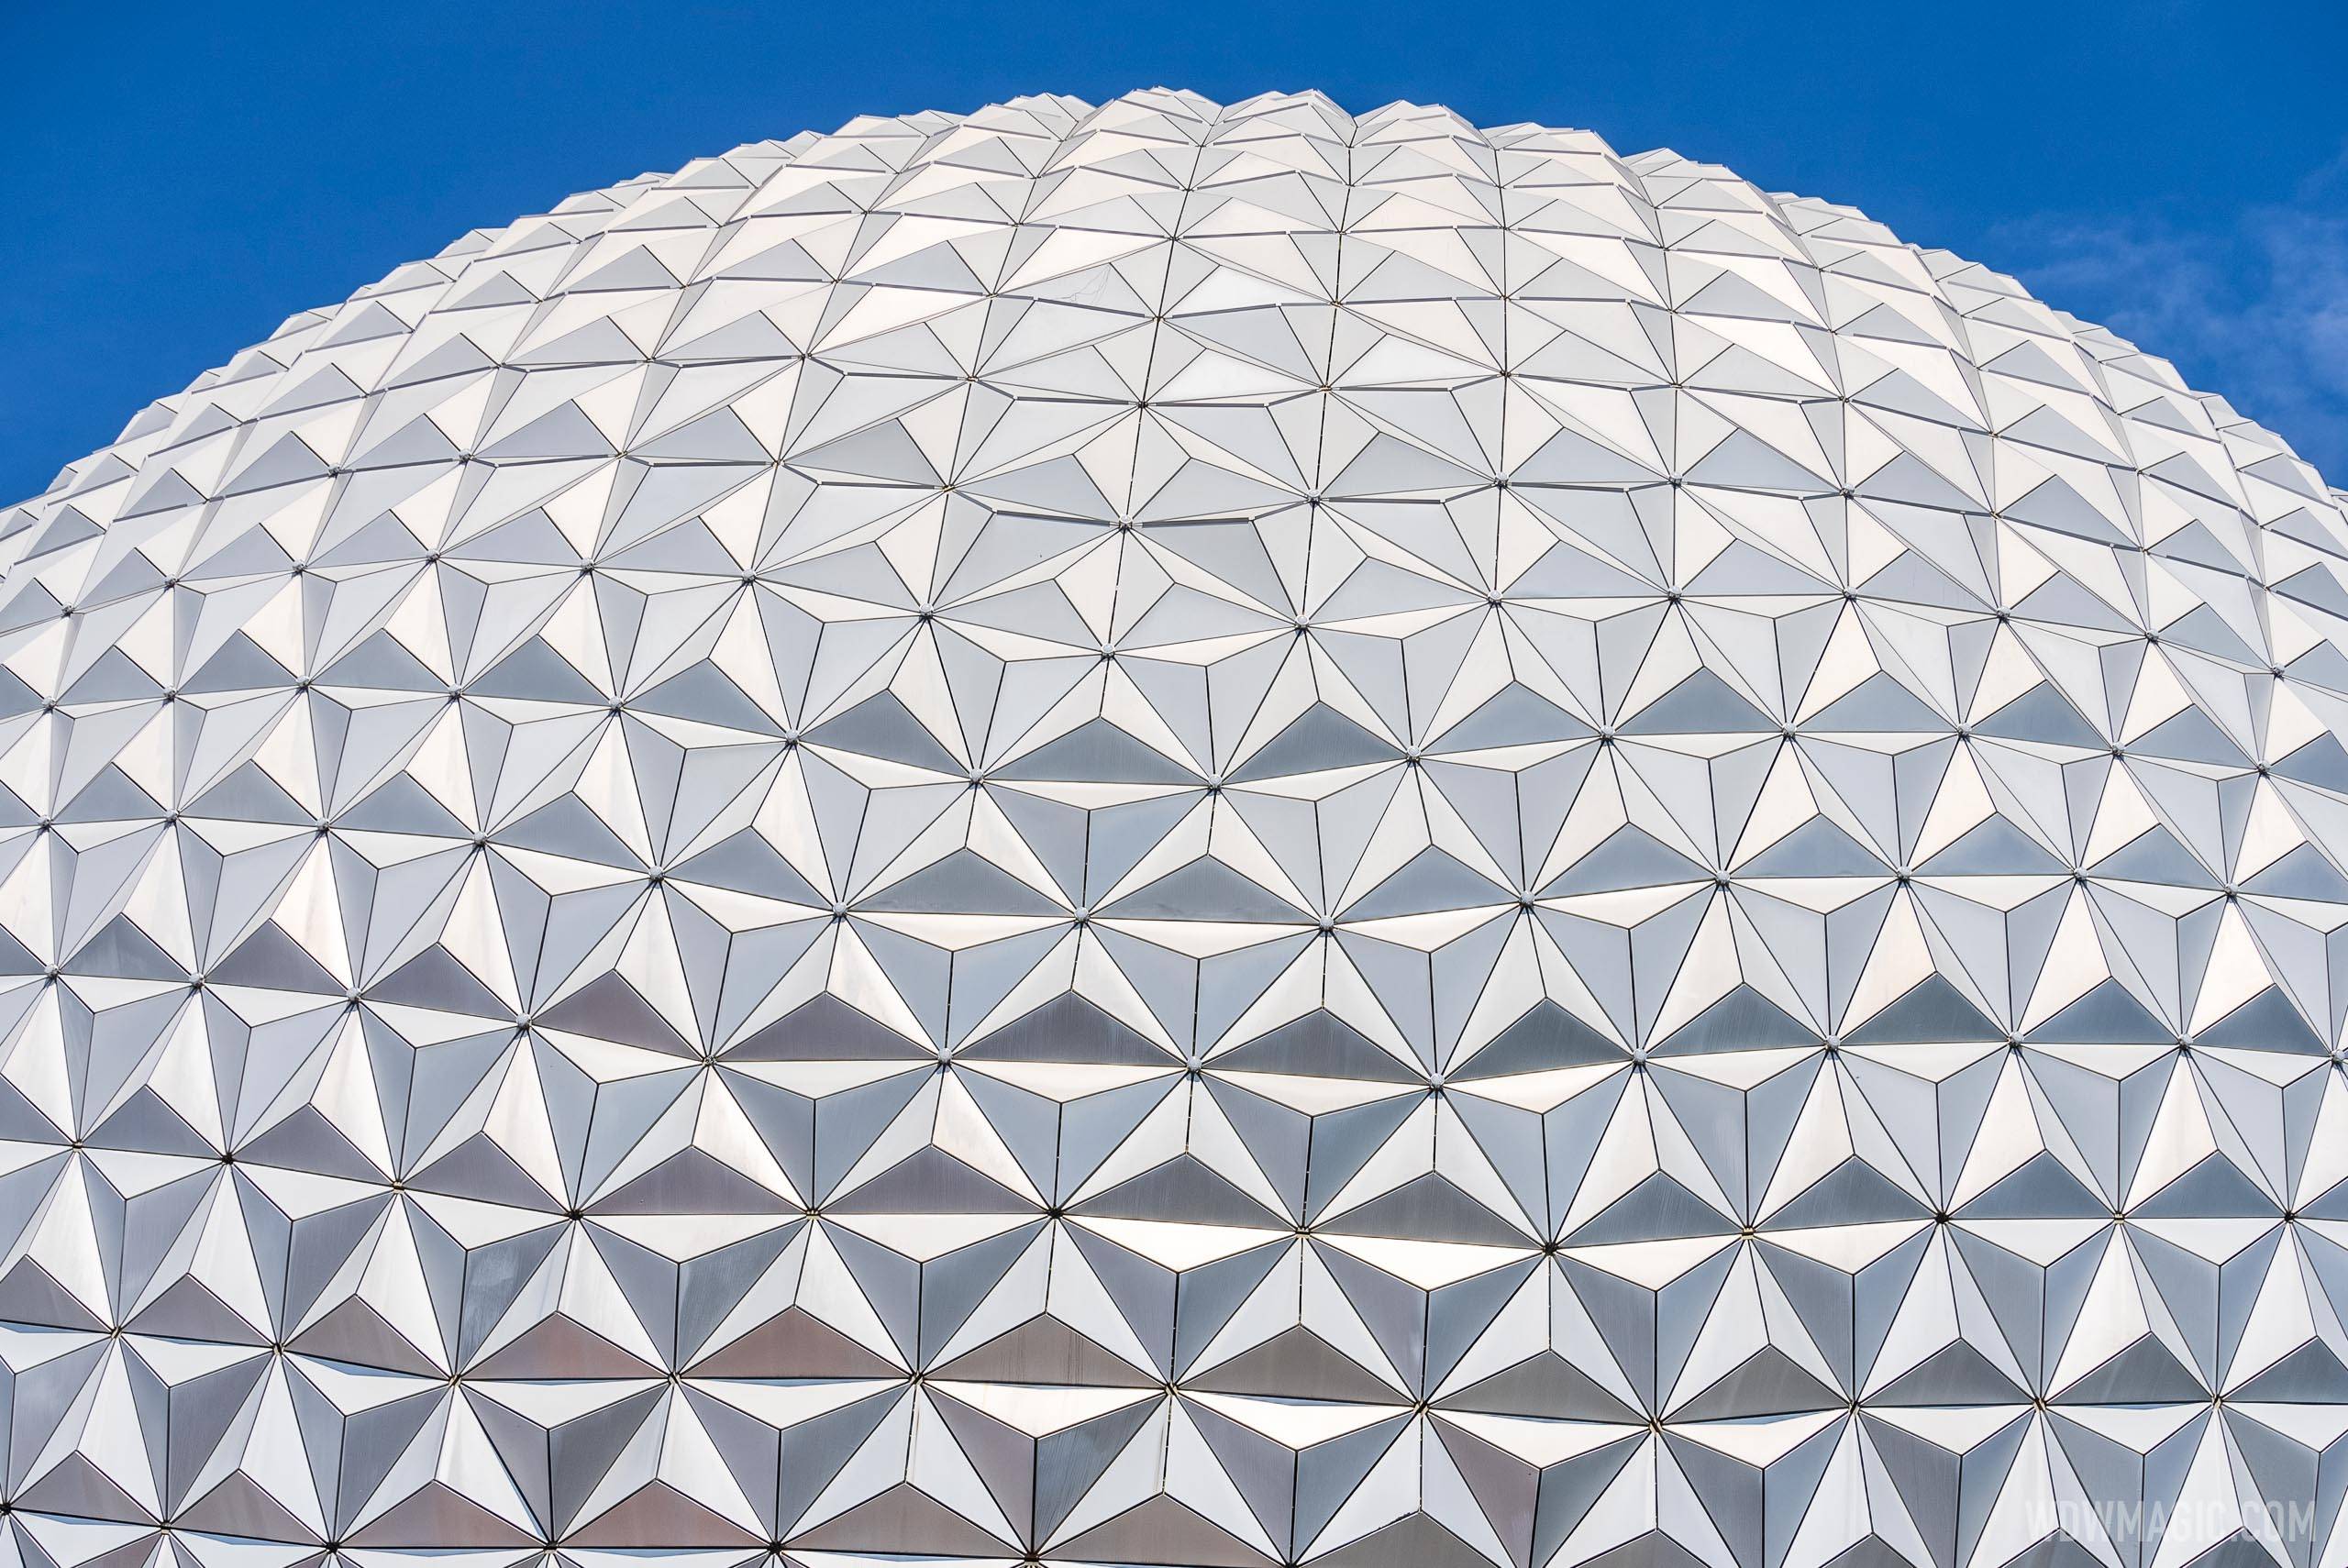 More than 75 'Points of Light' now in position on Spaceship Earth as high reach lift arrives